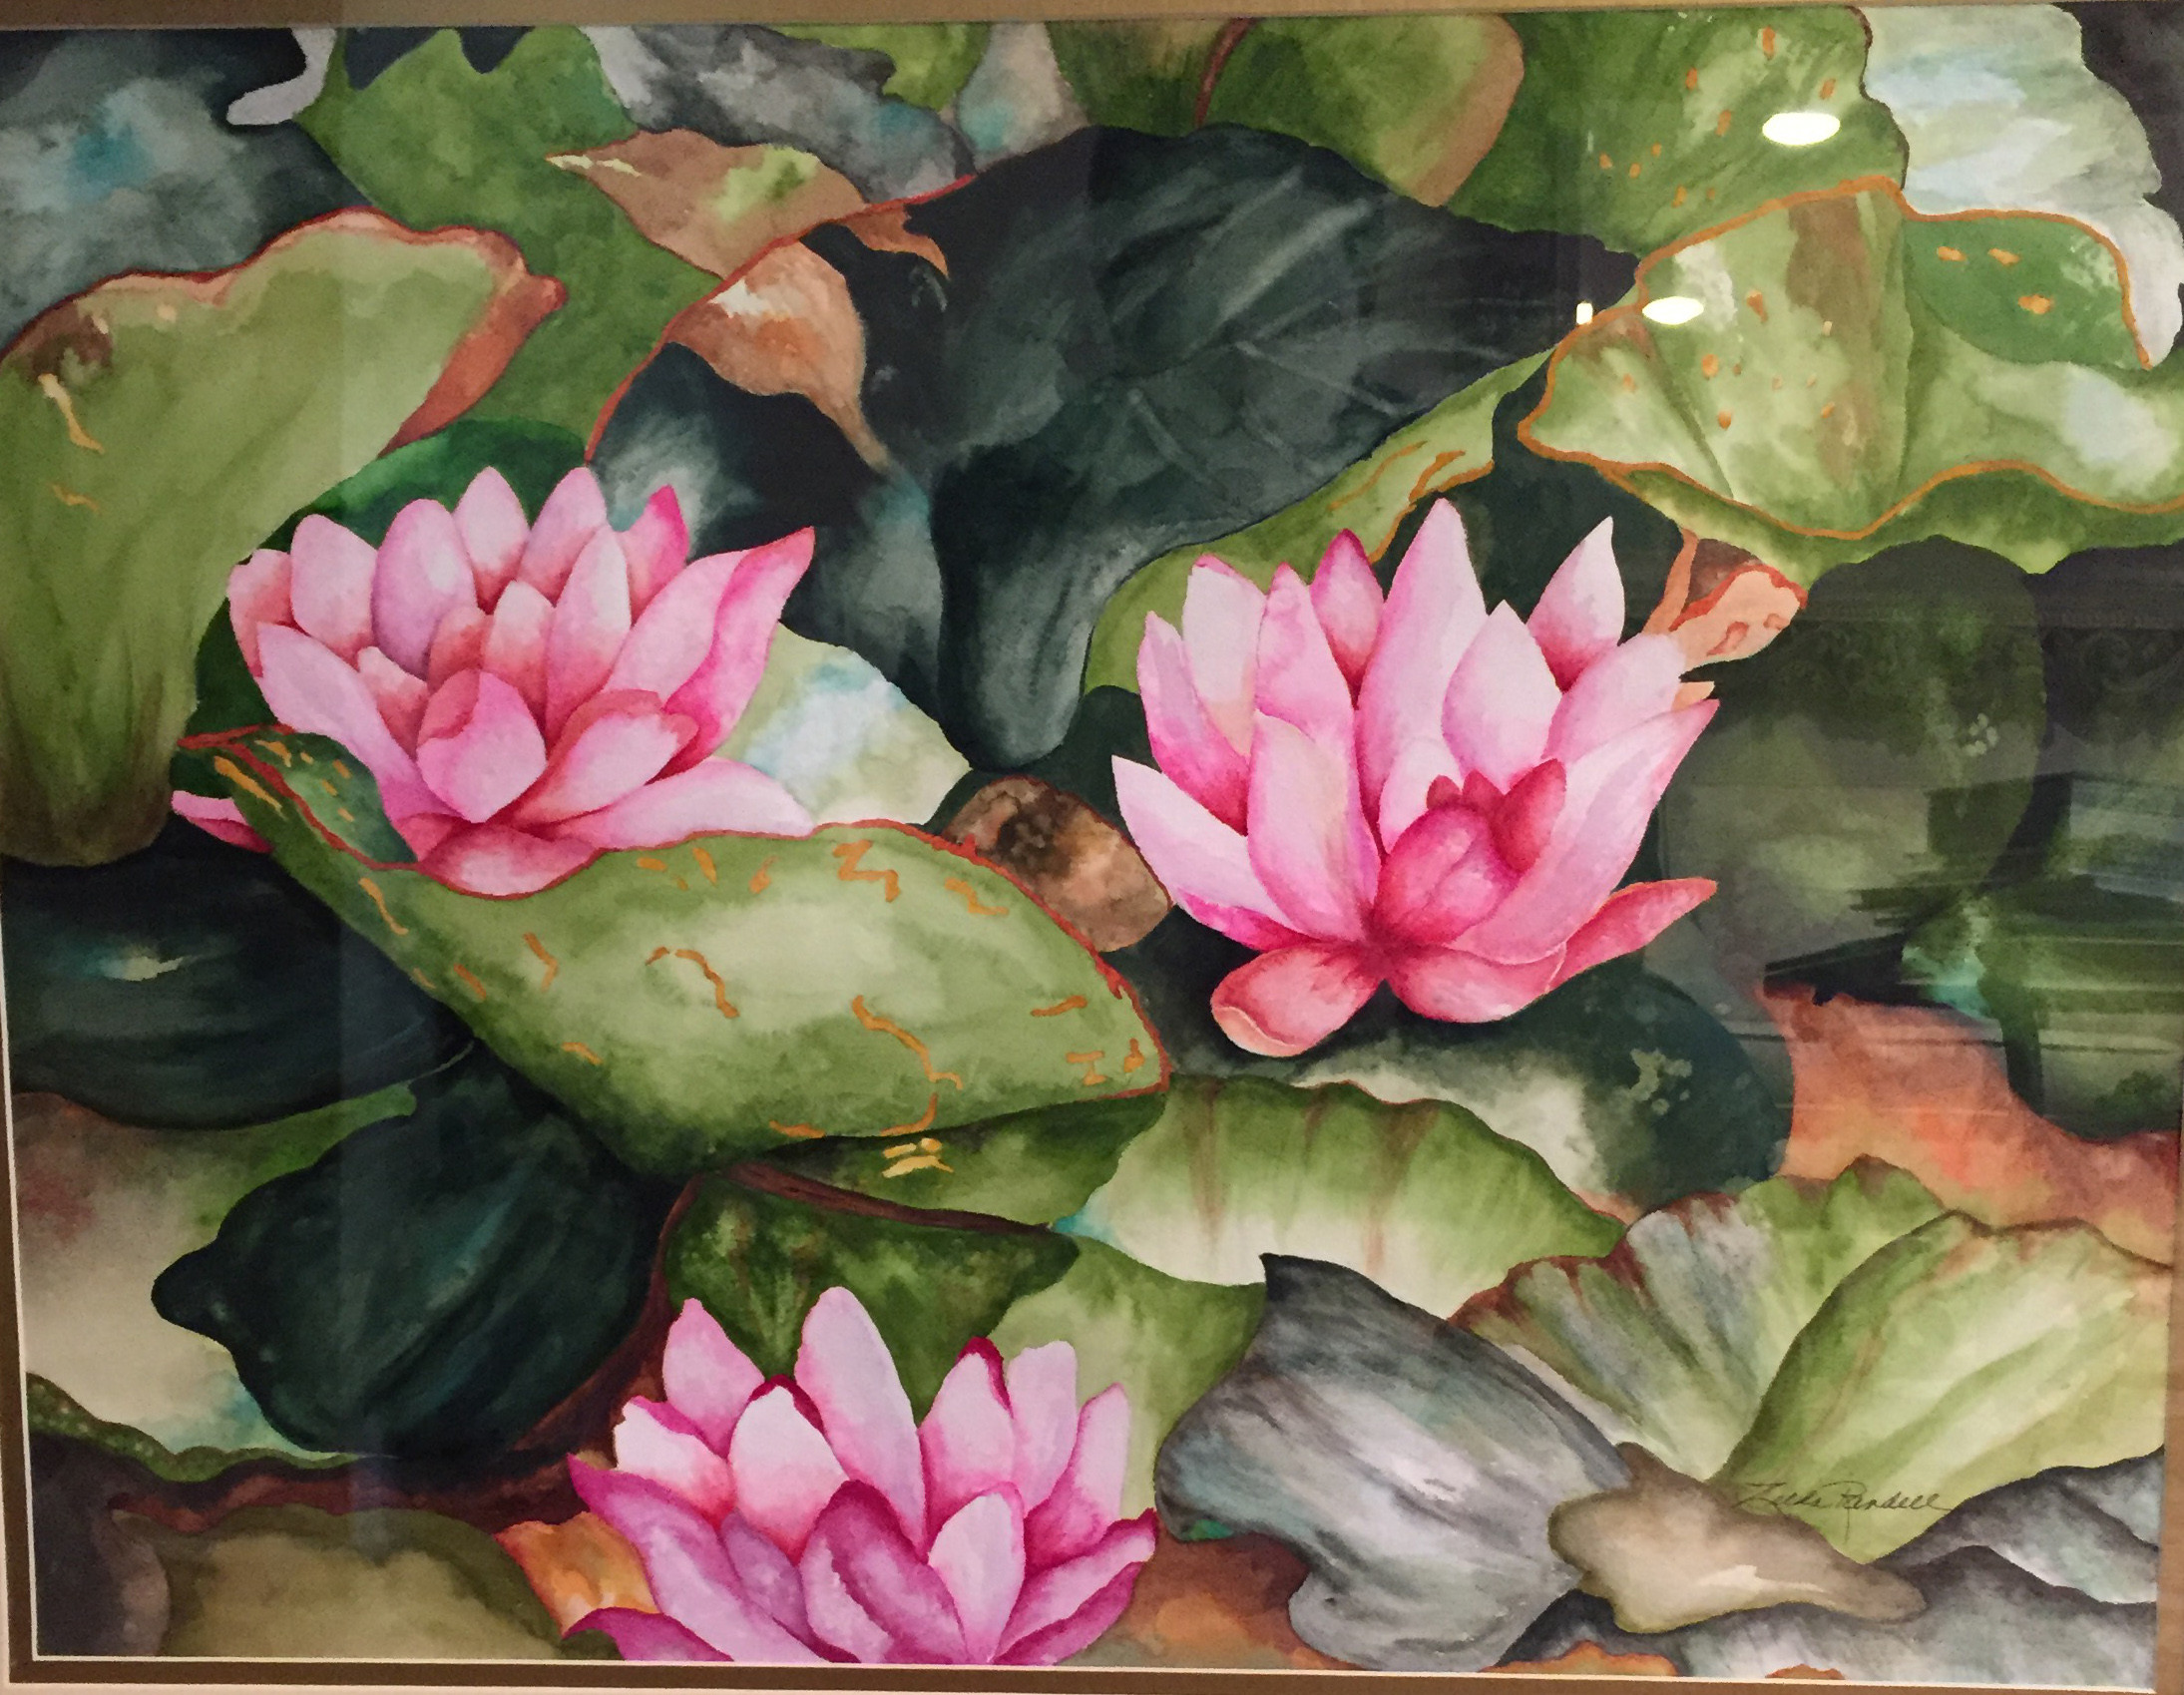 Malverne’s Zelda Randell is a watercolor artist who will have several paintings, including “Water Lilies,” on display during the ArtWalk.